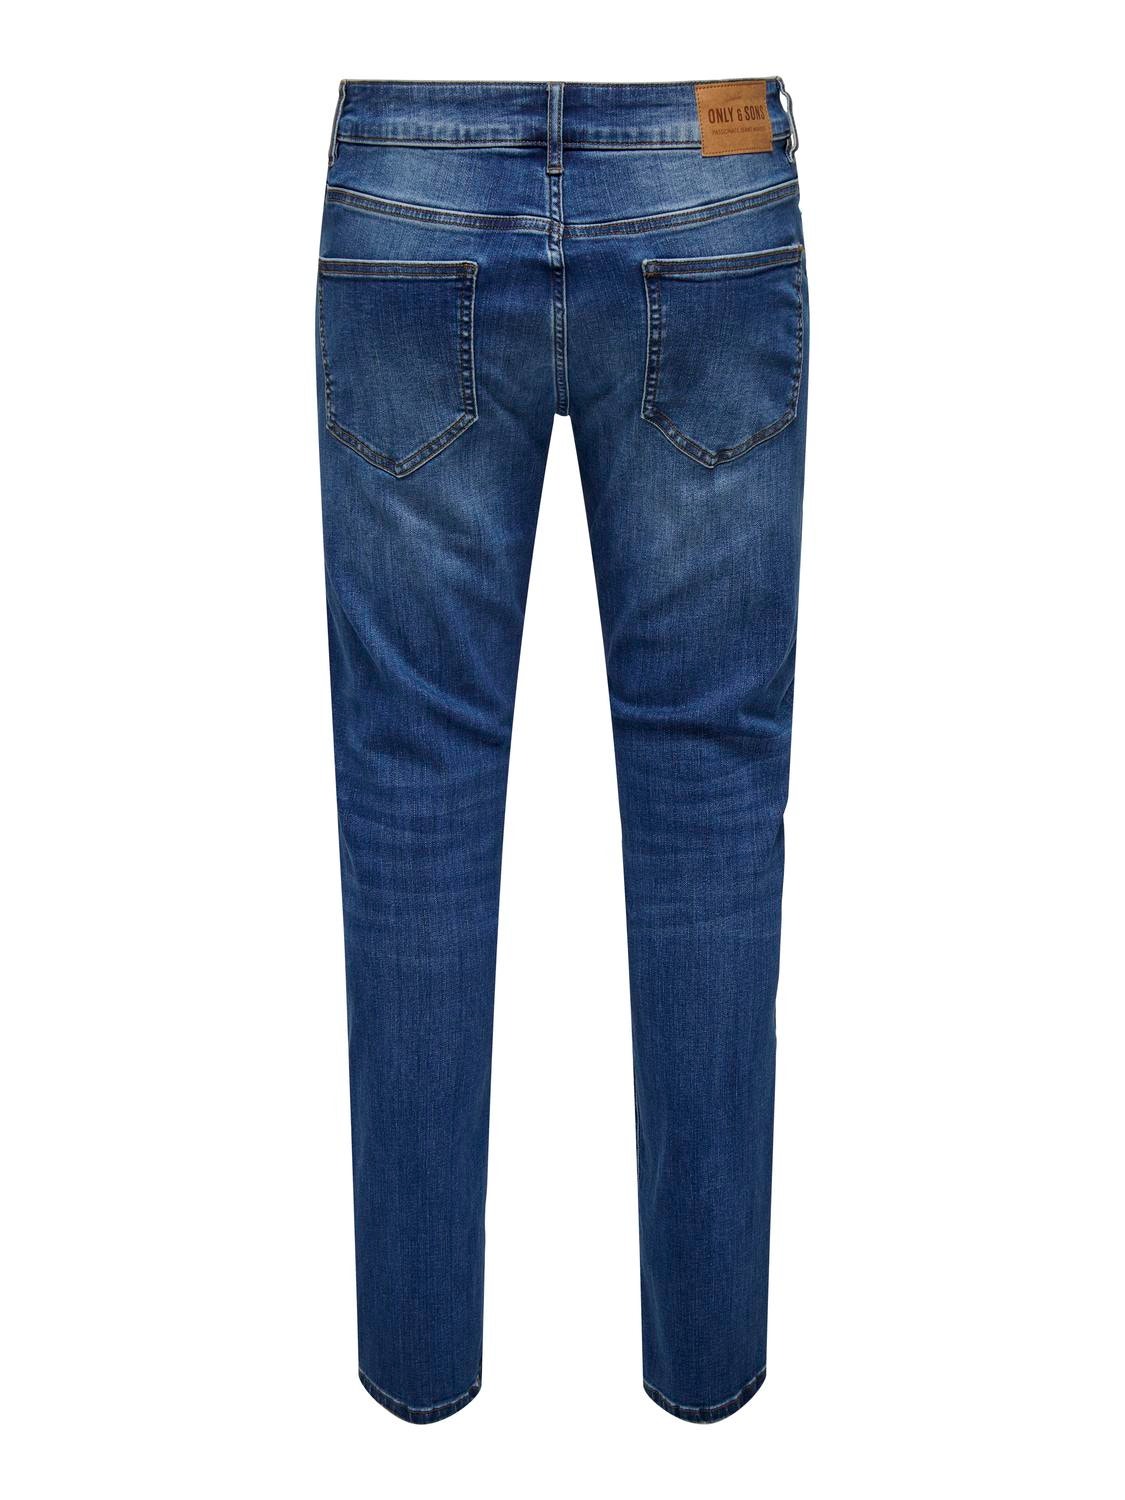 ONLY & SONS Jeans Slim Fit Taille moyenne -Medium Blue Denim - 22028519